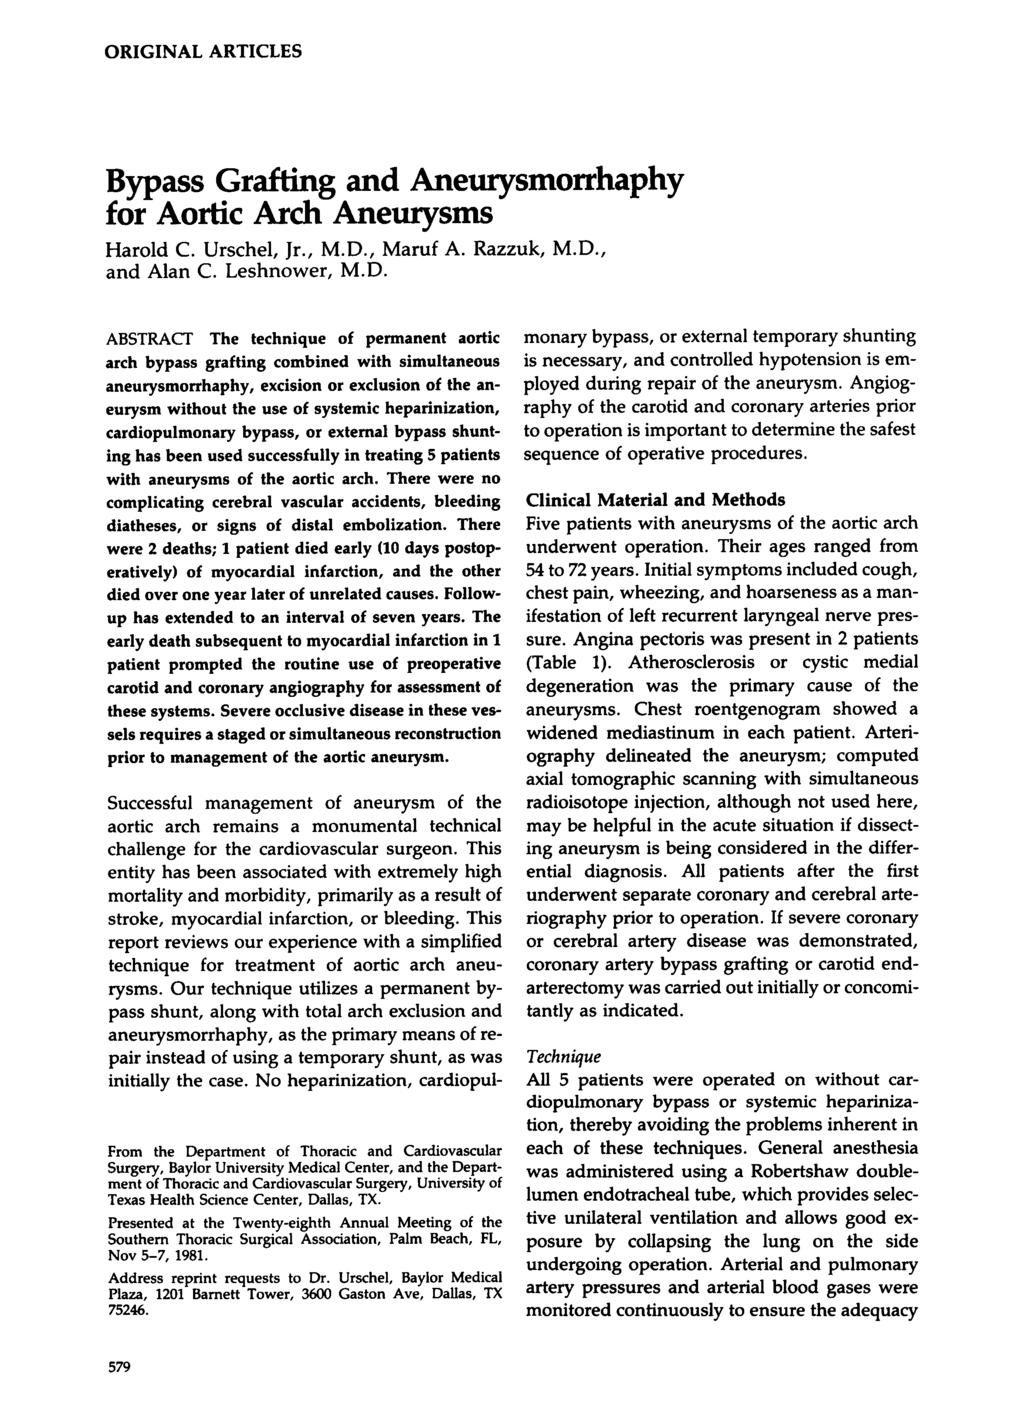 ORIGINAL ARTICLES Bypass Grafting and Aneurysmorrhaphy for Aortic Arch Aneurysms Harold C. Urschel, Jr., M.D.